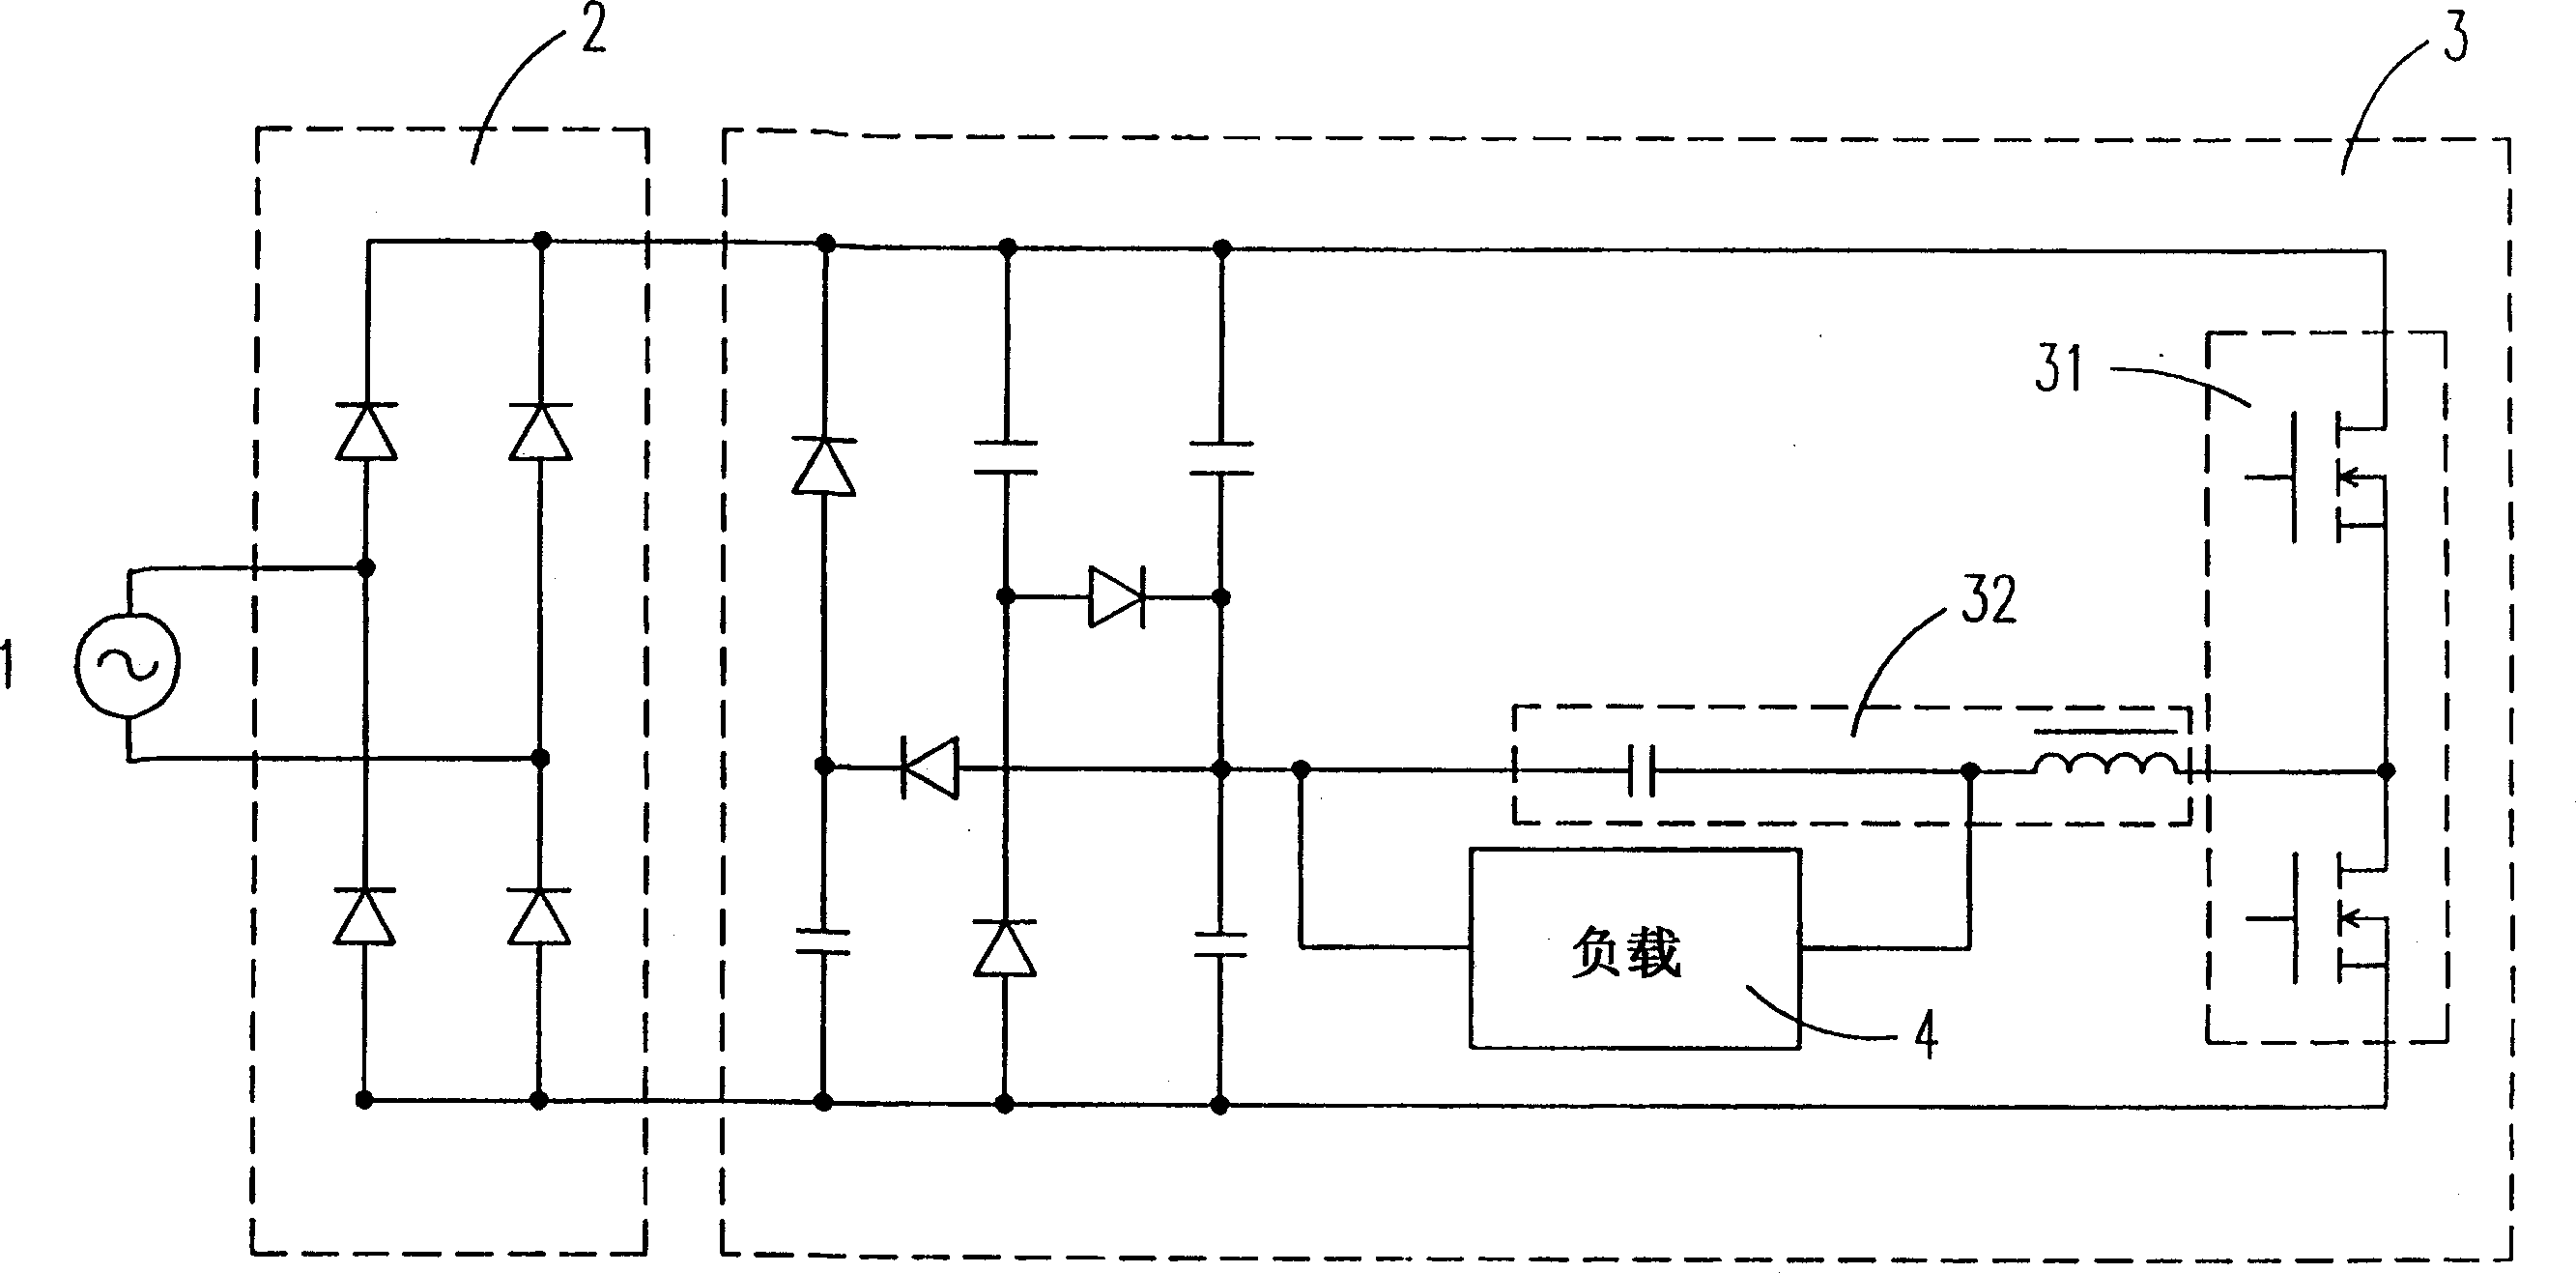 Electronic ballast circuit with function of correcting power factor and load current amplitude factor